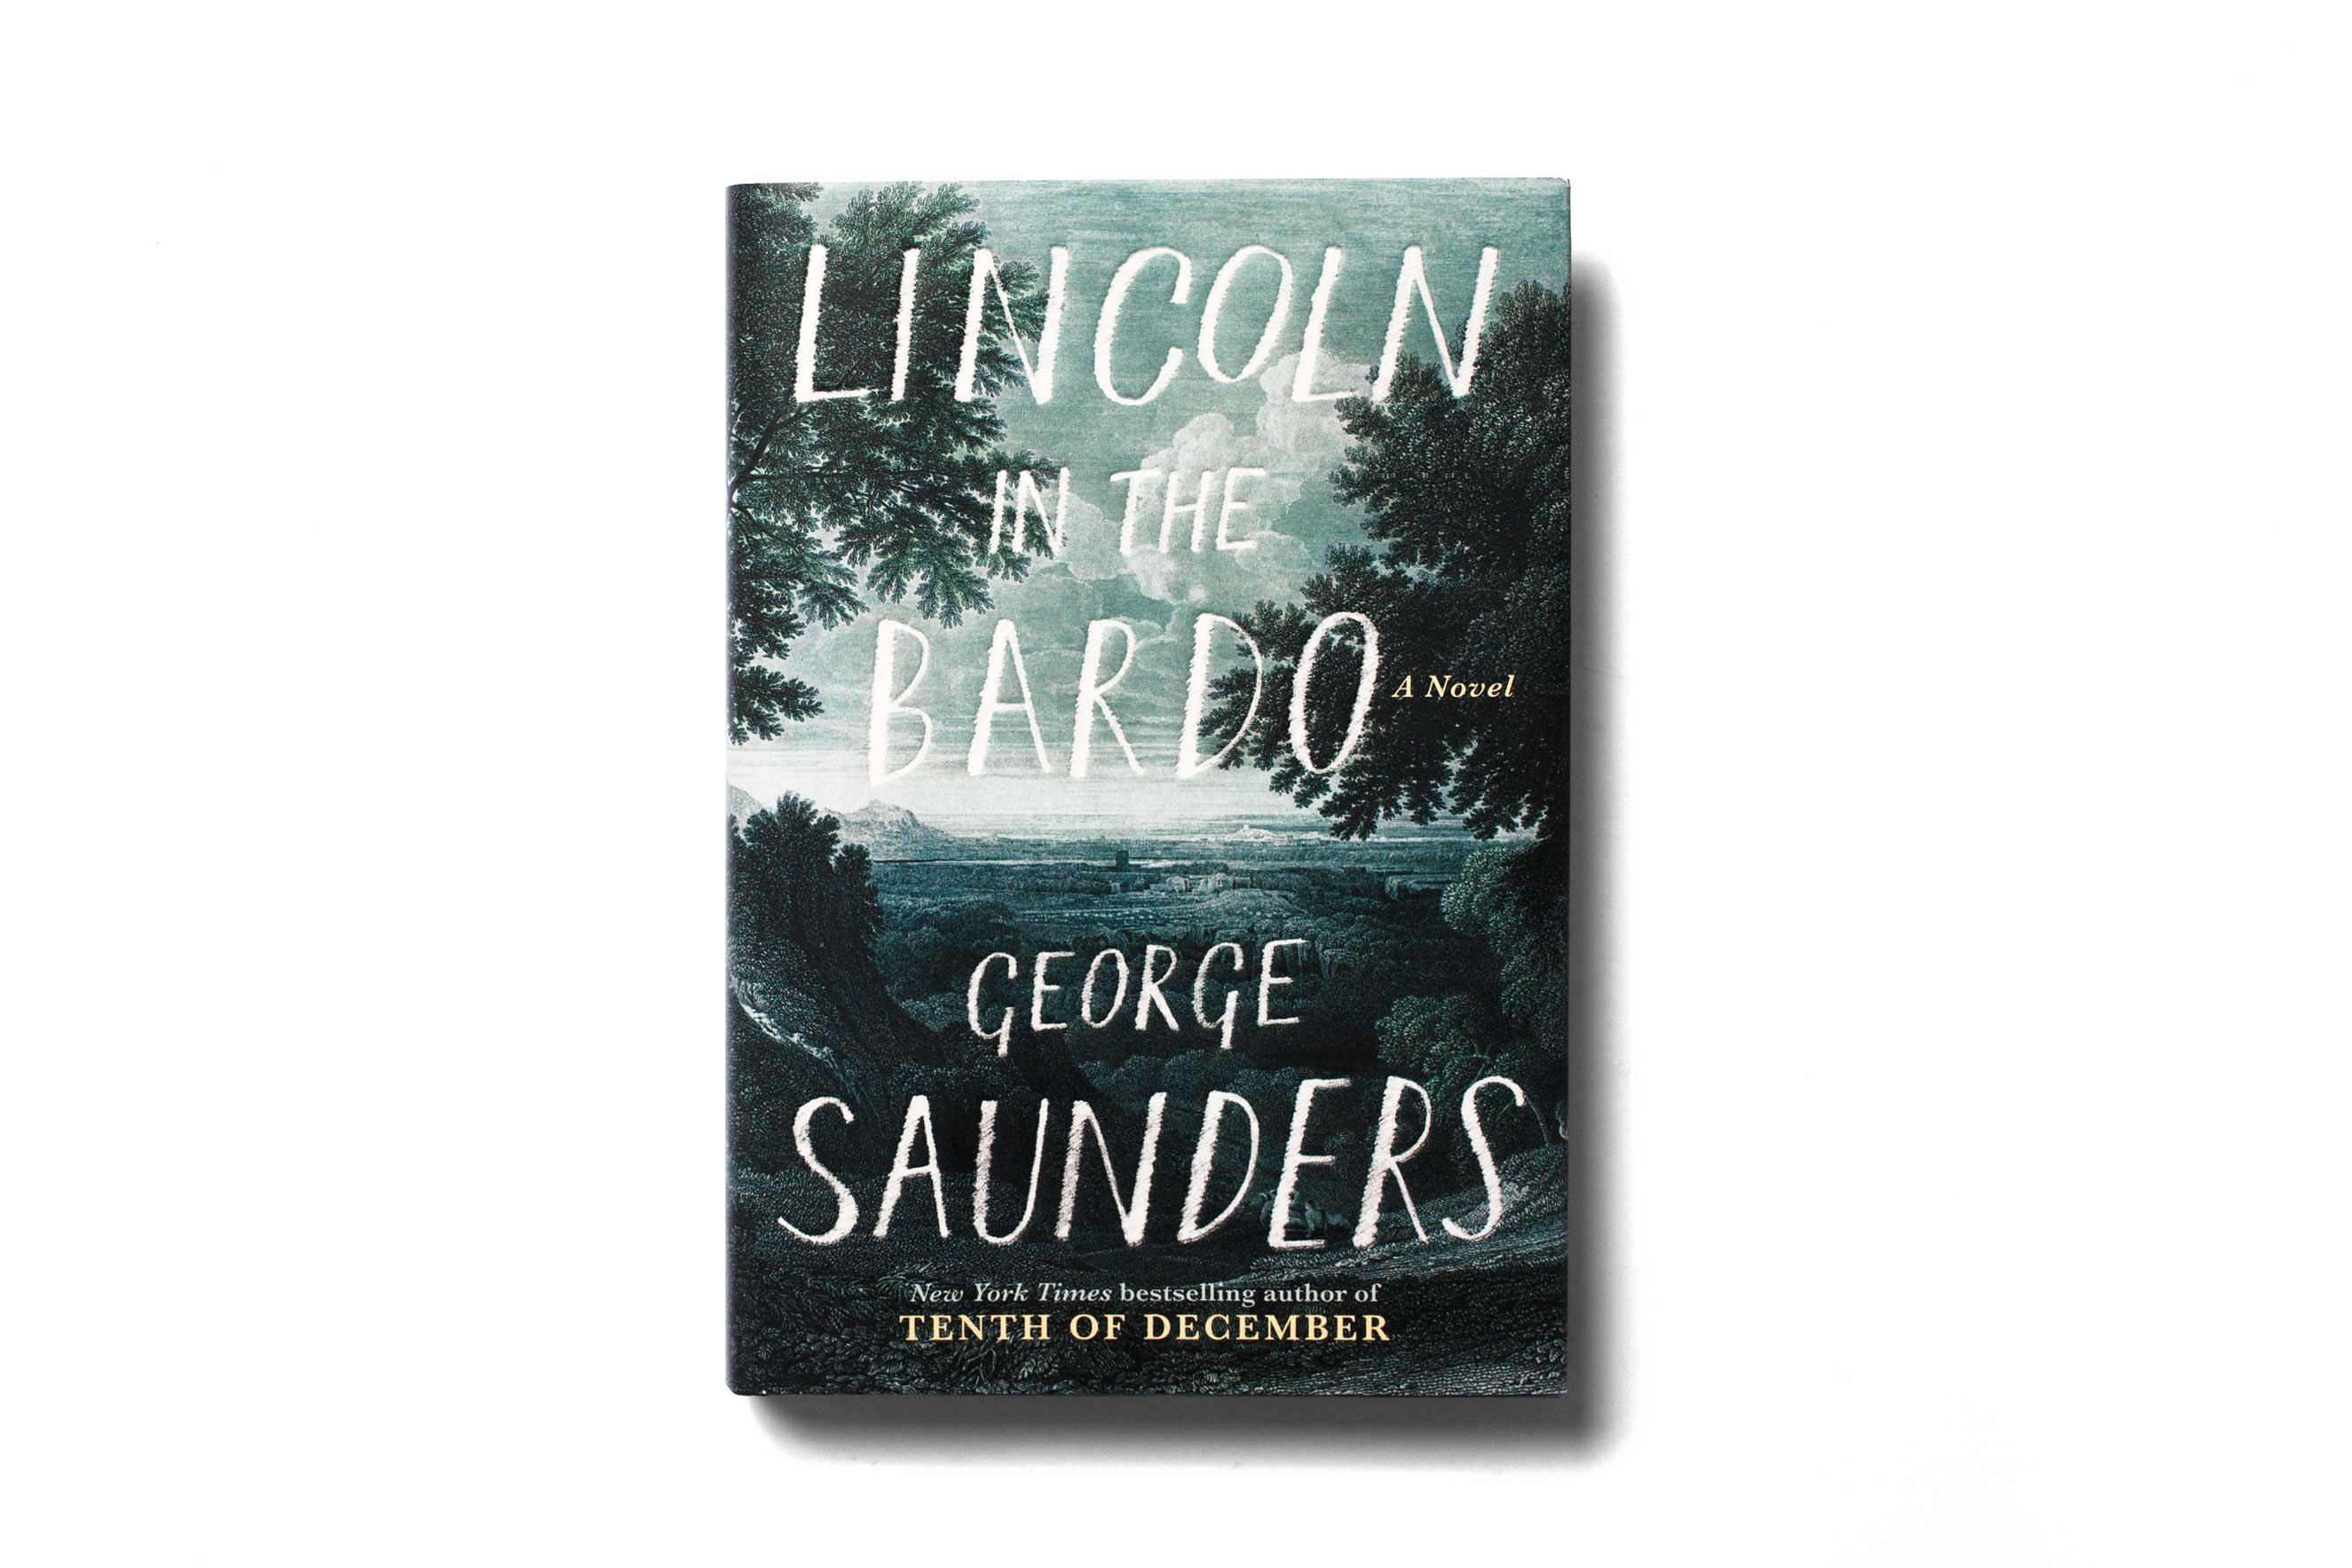 George Saunders' "Lincoln in the Bardo"